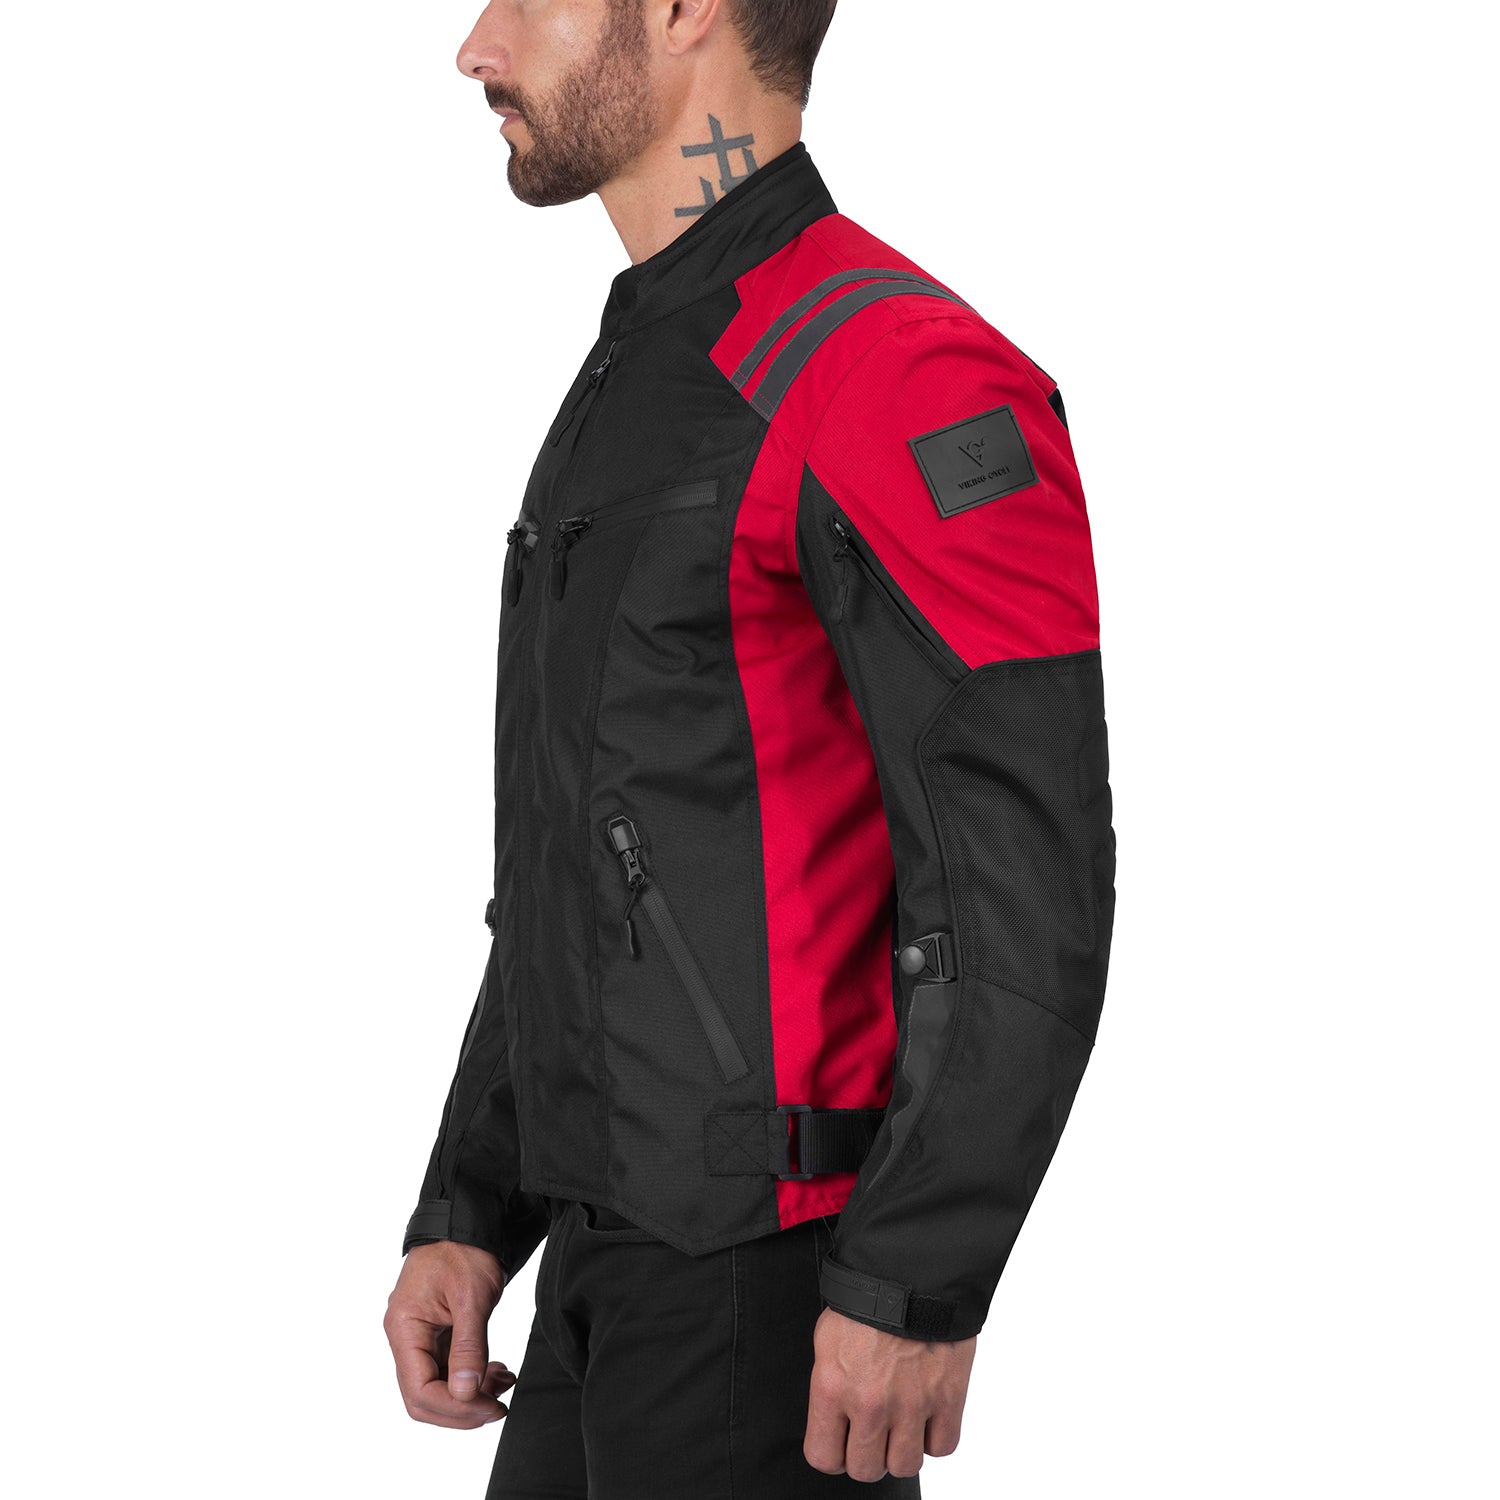 Biker Find – â€“ Textile Ironborn Red Cycle Quality Viking Vikingcycle Jacket